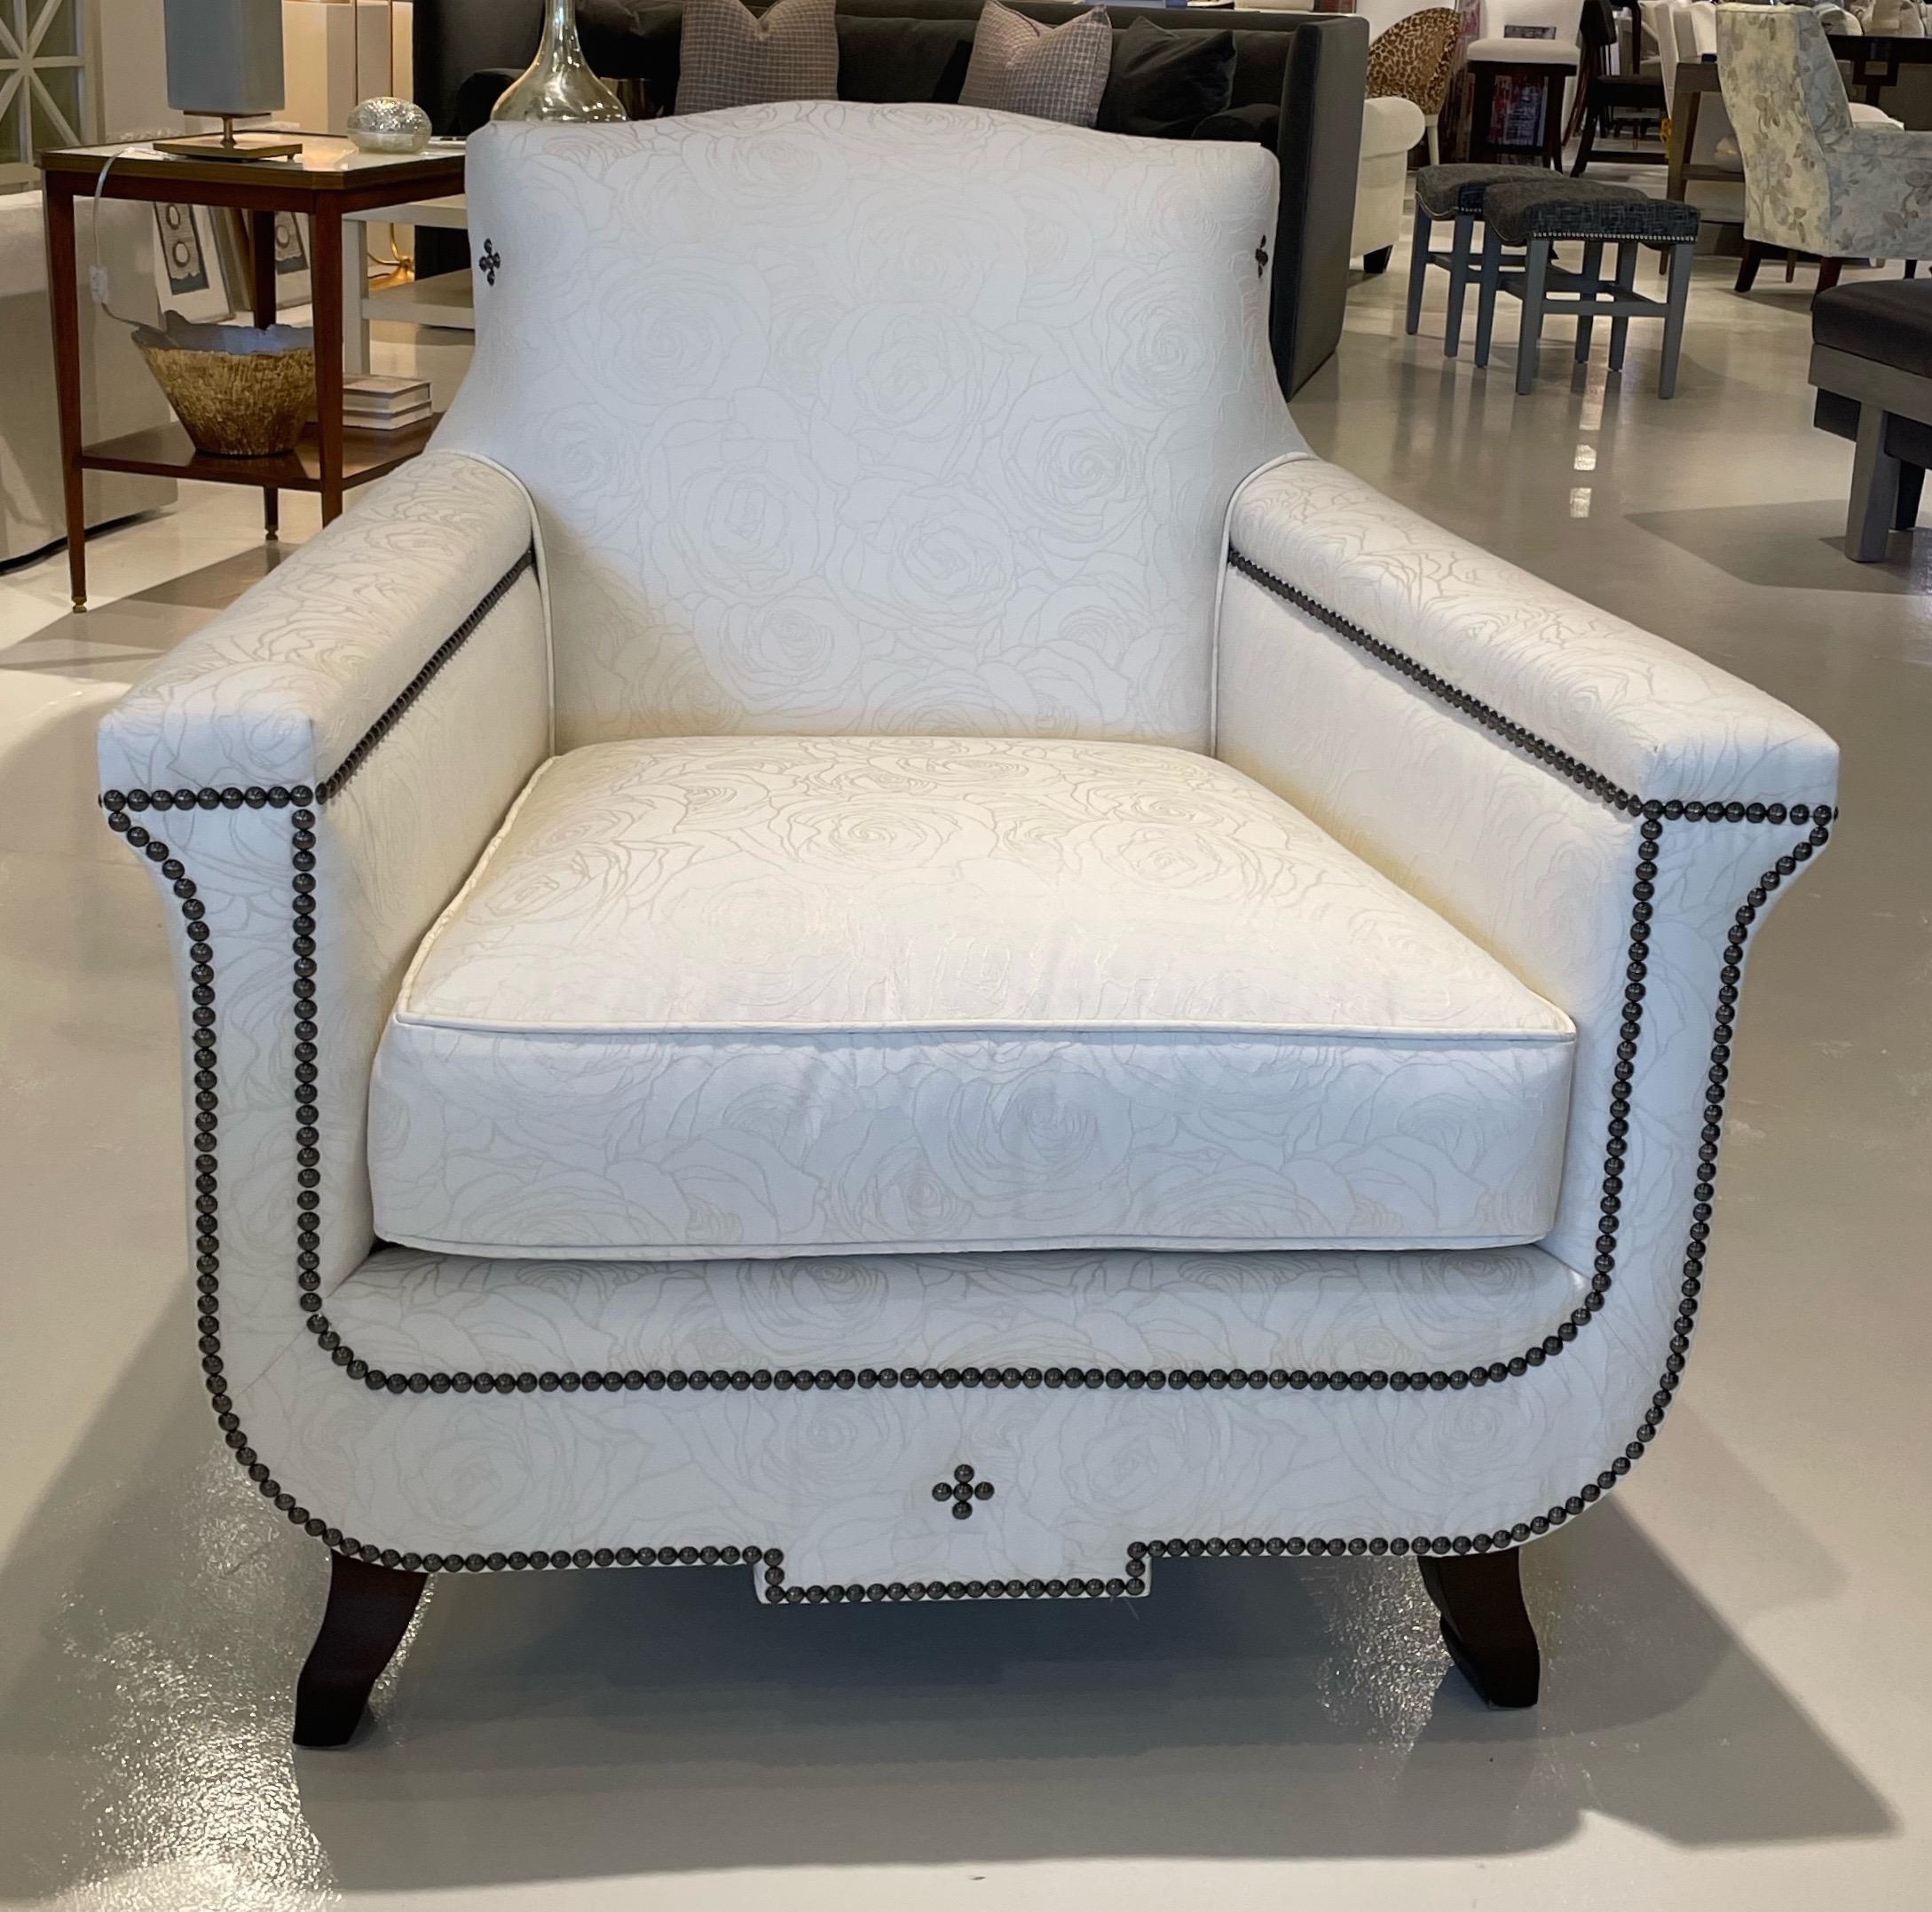 Showroom New - Bolero Chair designed by Mariette Himes Gomez who has been ranked in the top 100 interior designers in the world. Antique inspired generously scaled chair with a distinctive lyre shape detailed with decorative nails. Spring down seat